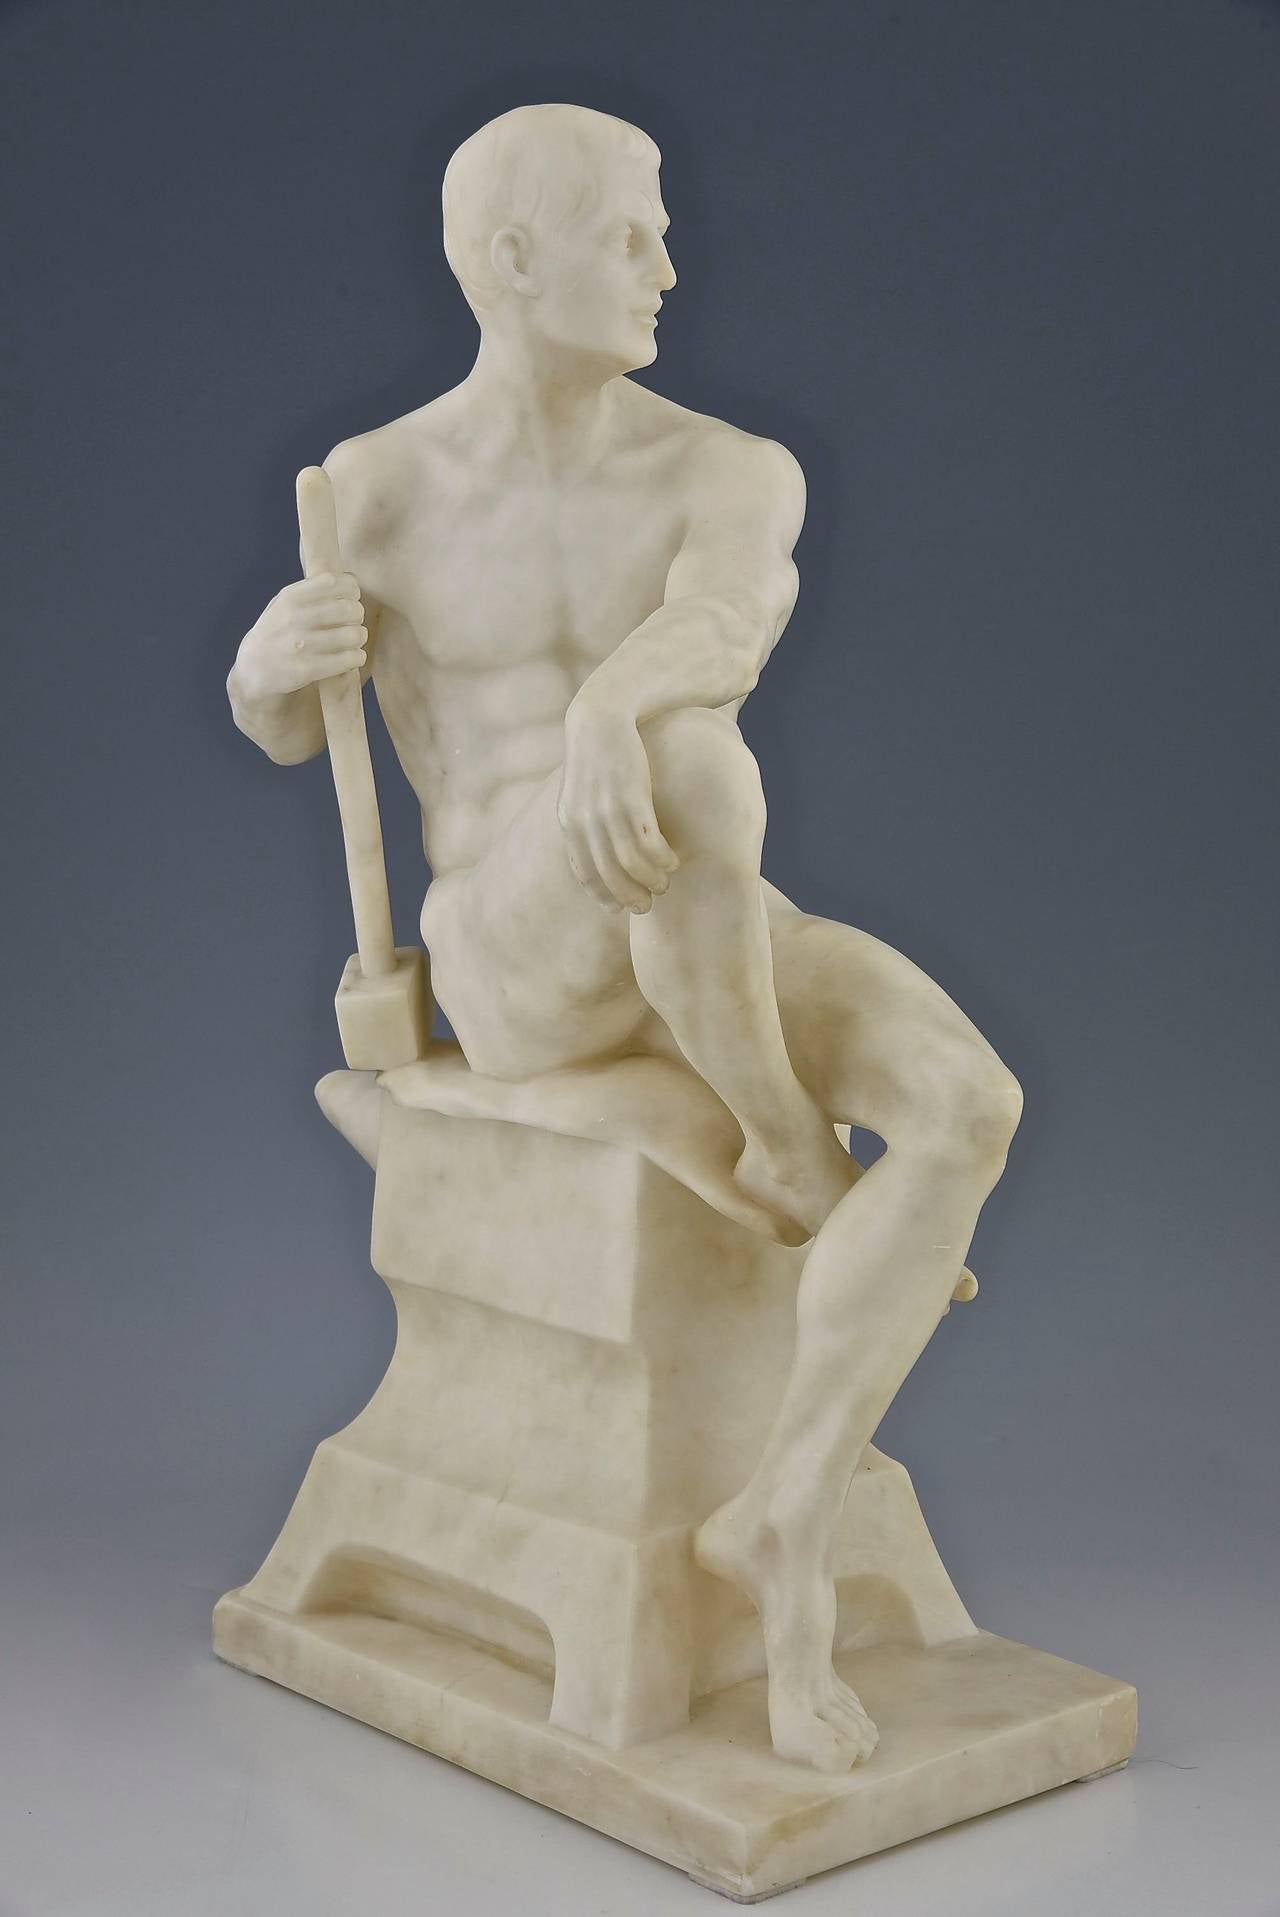 Romantic Antique Marble Sculpture of a Male Nude by Franz Iffland, 1890, Germany